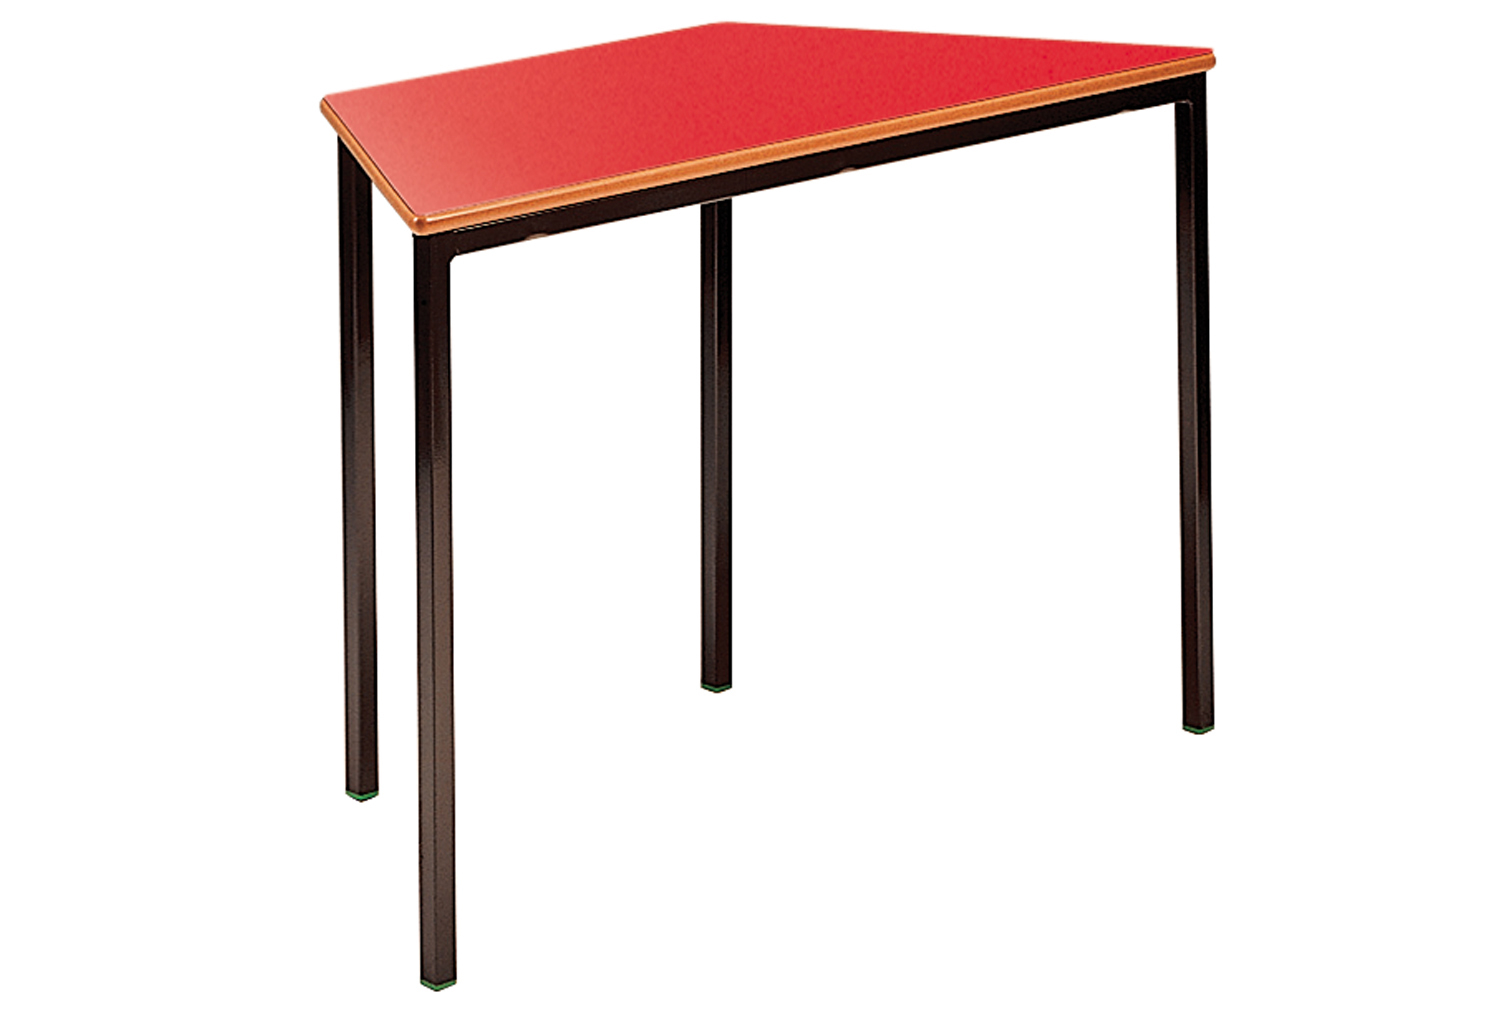 Qty 4 - Trapezoidal Fully Welded Classroom Tables 8-11 Years, 120wx60dx64h (cm), Black Frame, Maple Top, PU Charcoal Edge